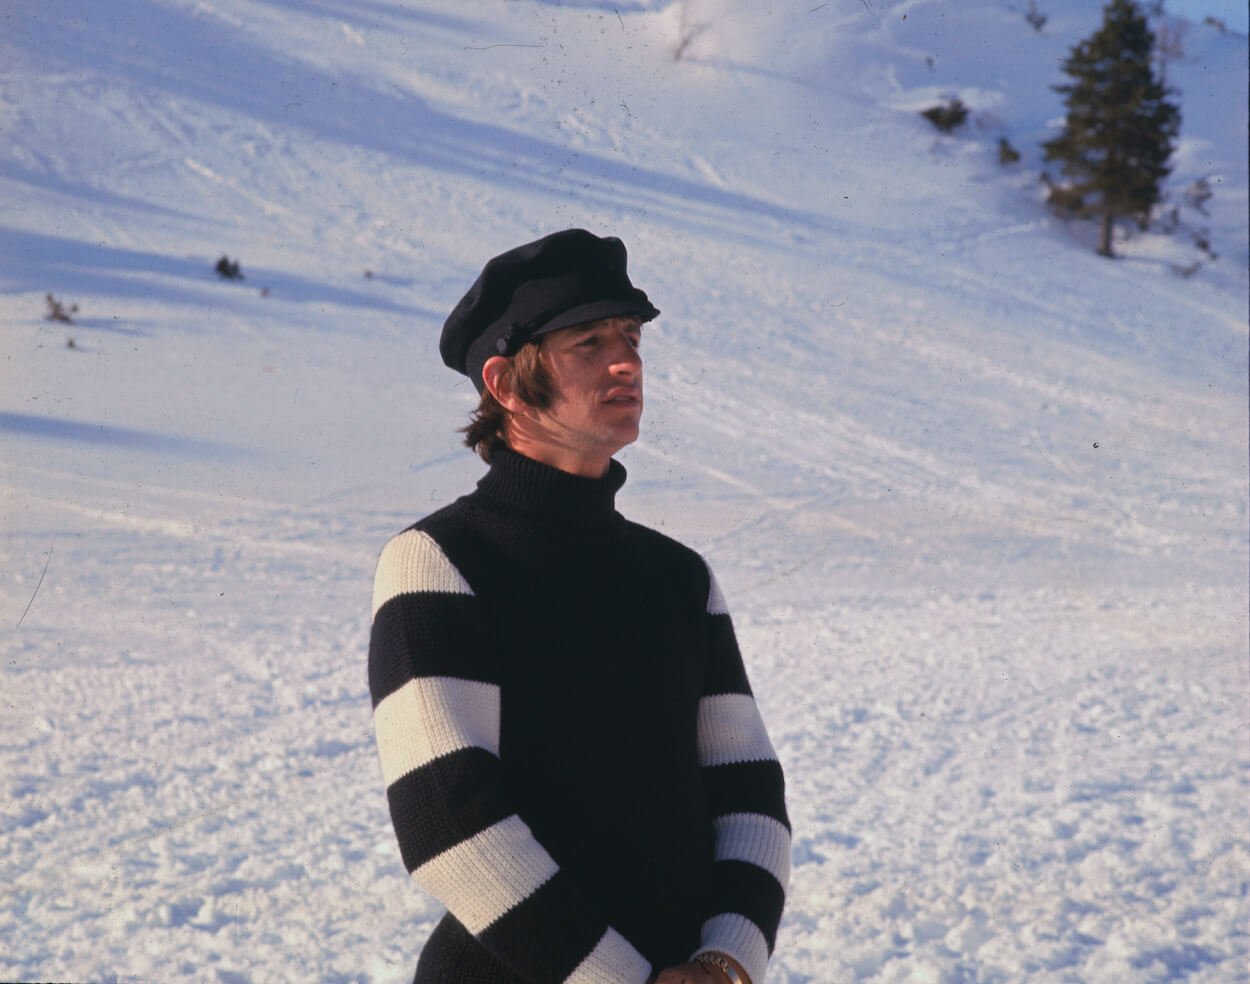 Ringo Starr stands on a ski slope while wearing a black and white striped sweater while filming 'Help!' in early 1965.